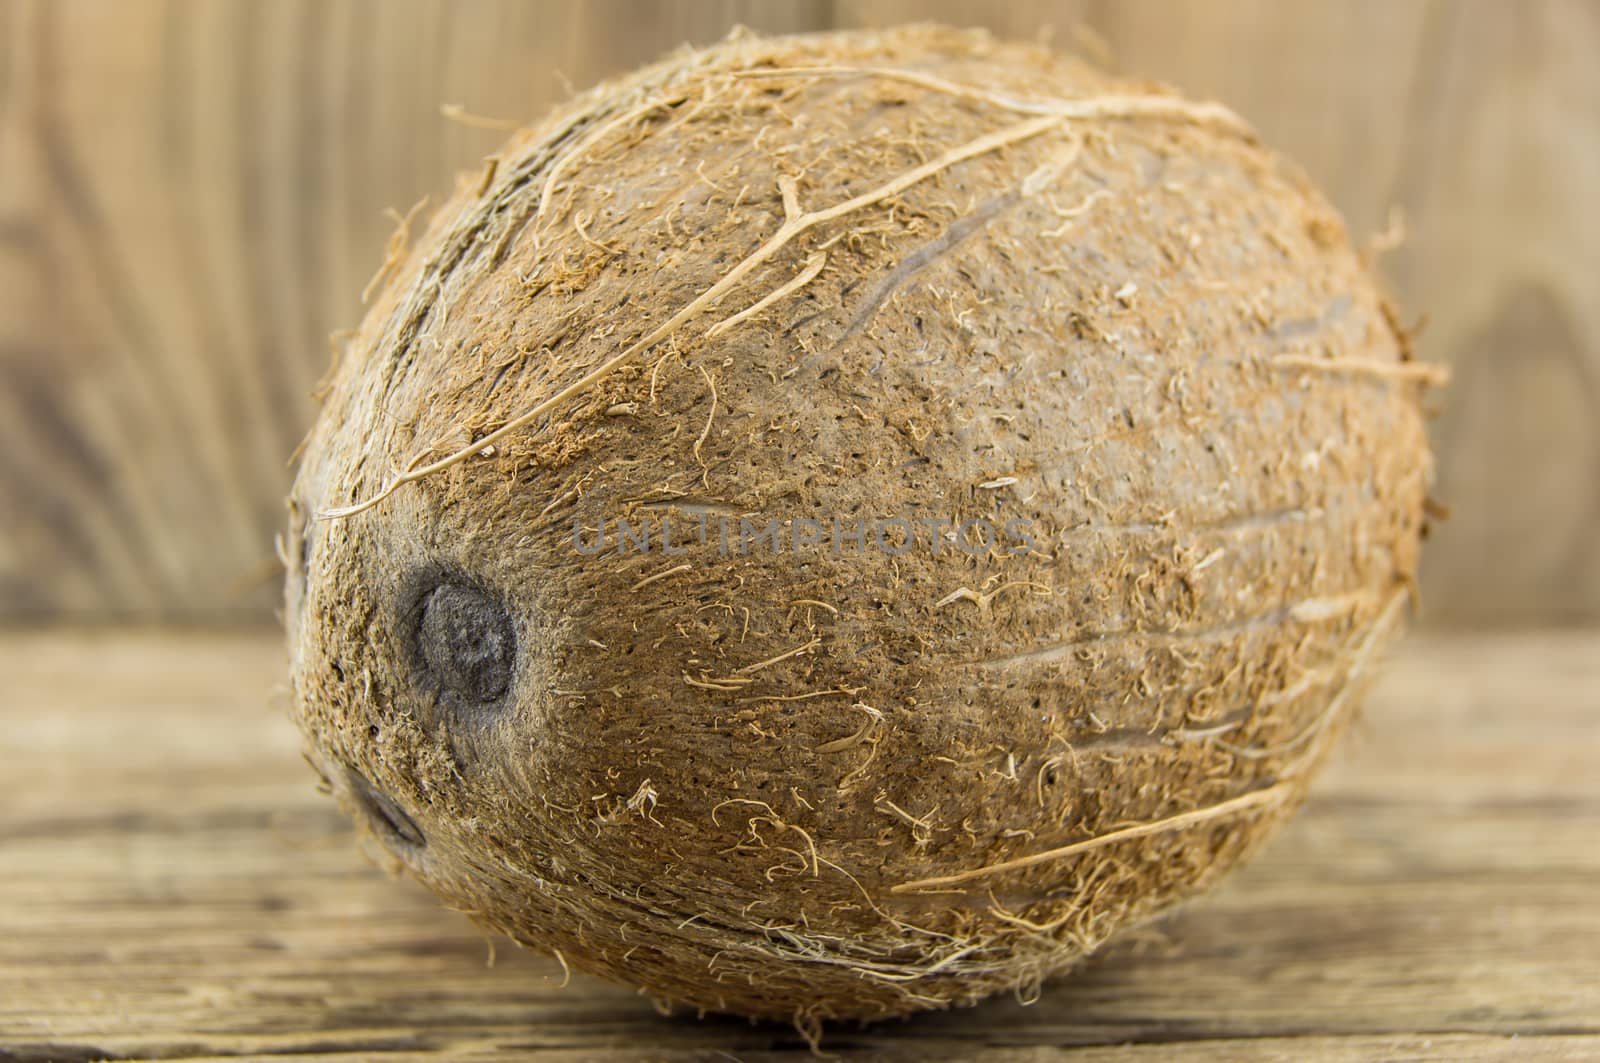 coconut and lie on a wooden background.